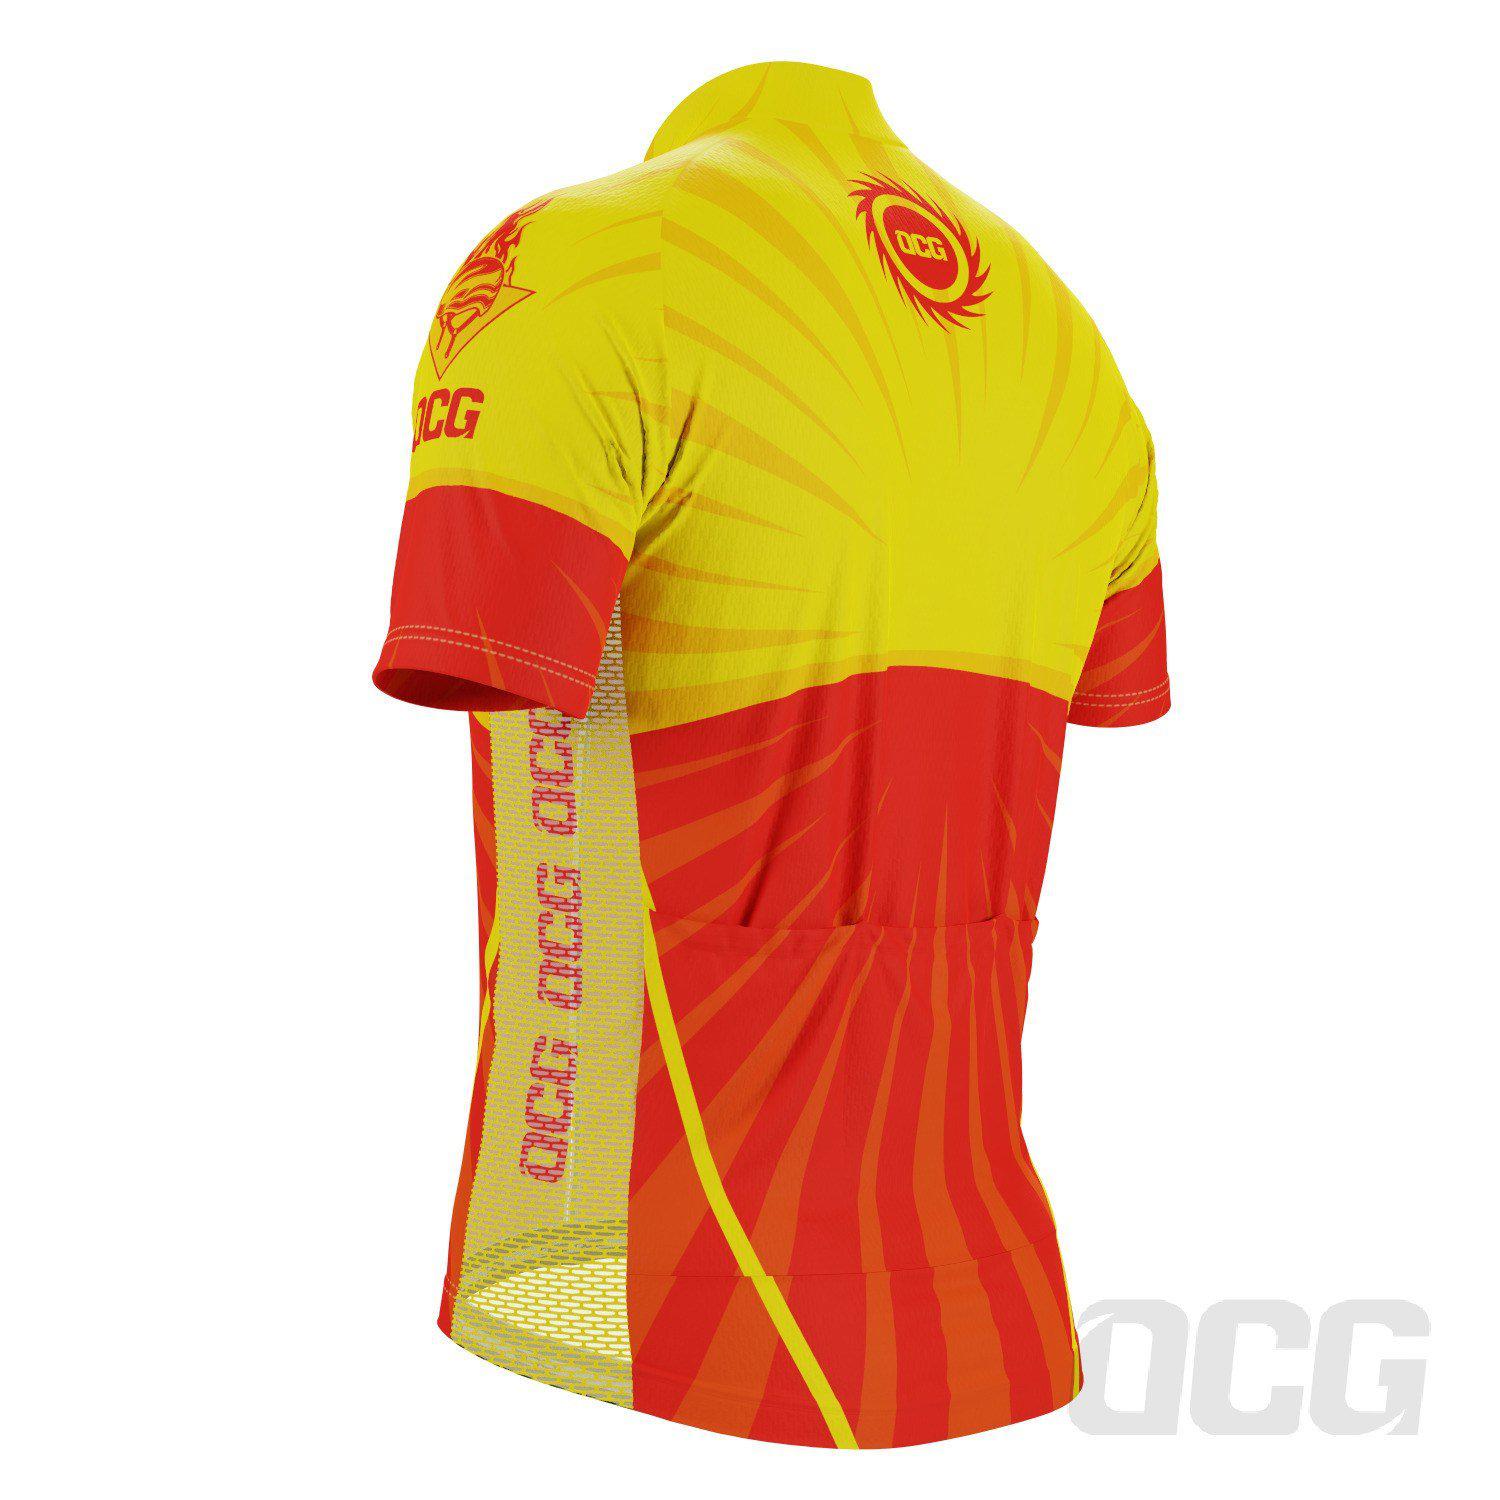 Men's Support the Sun Short Sleeve Cycling Jersey